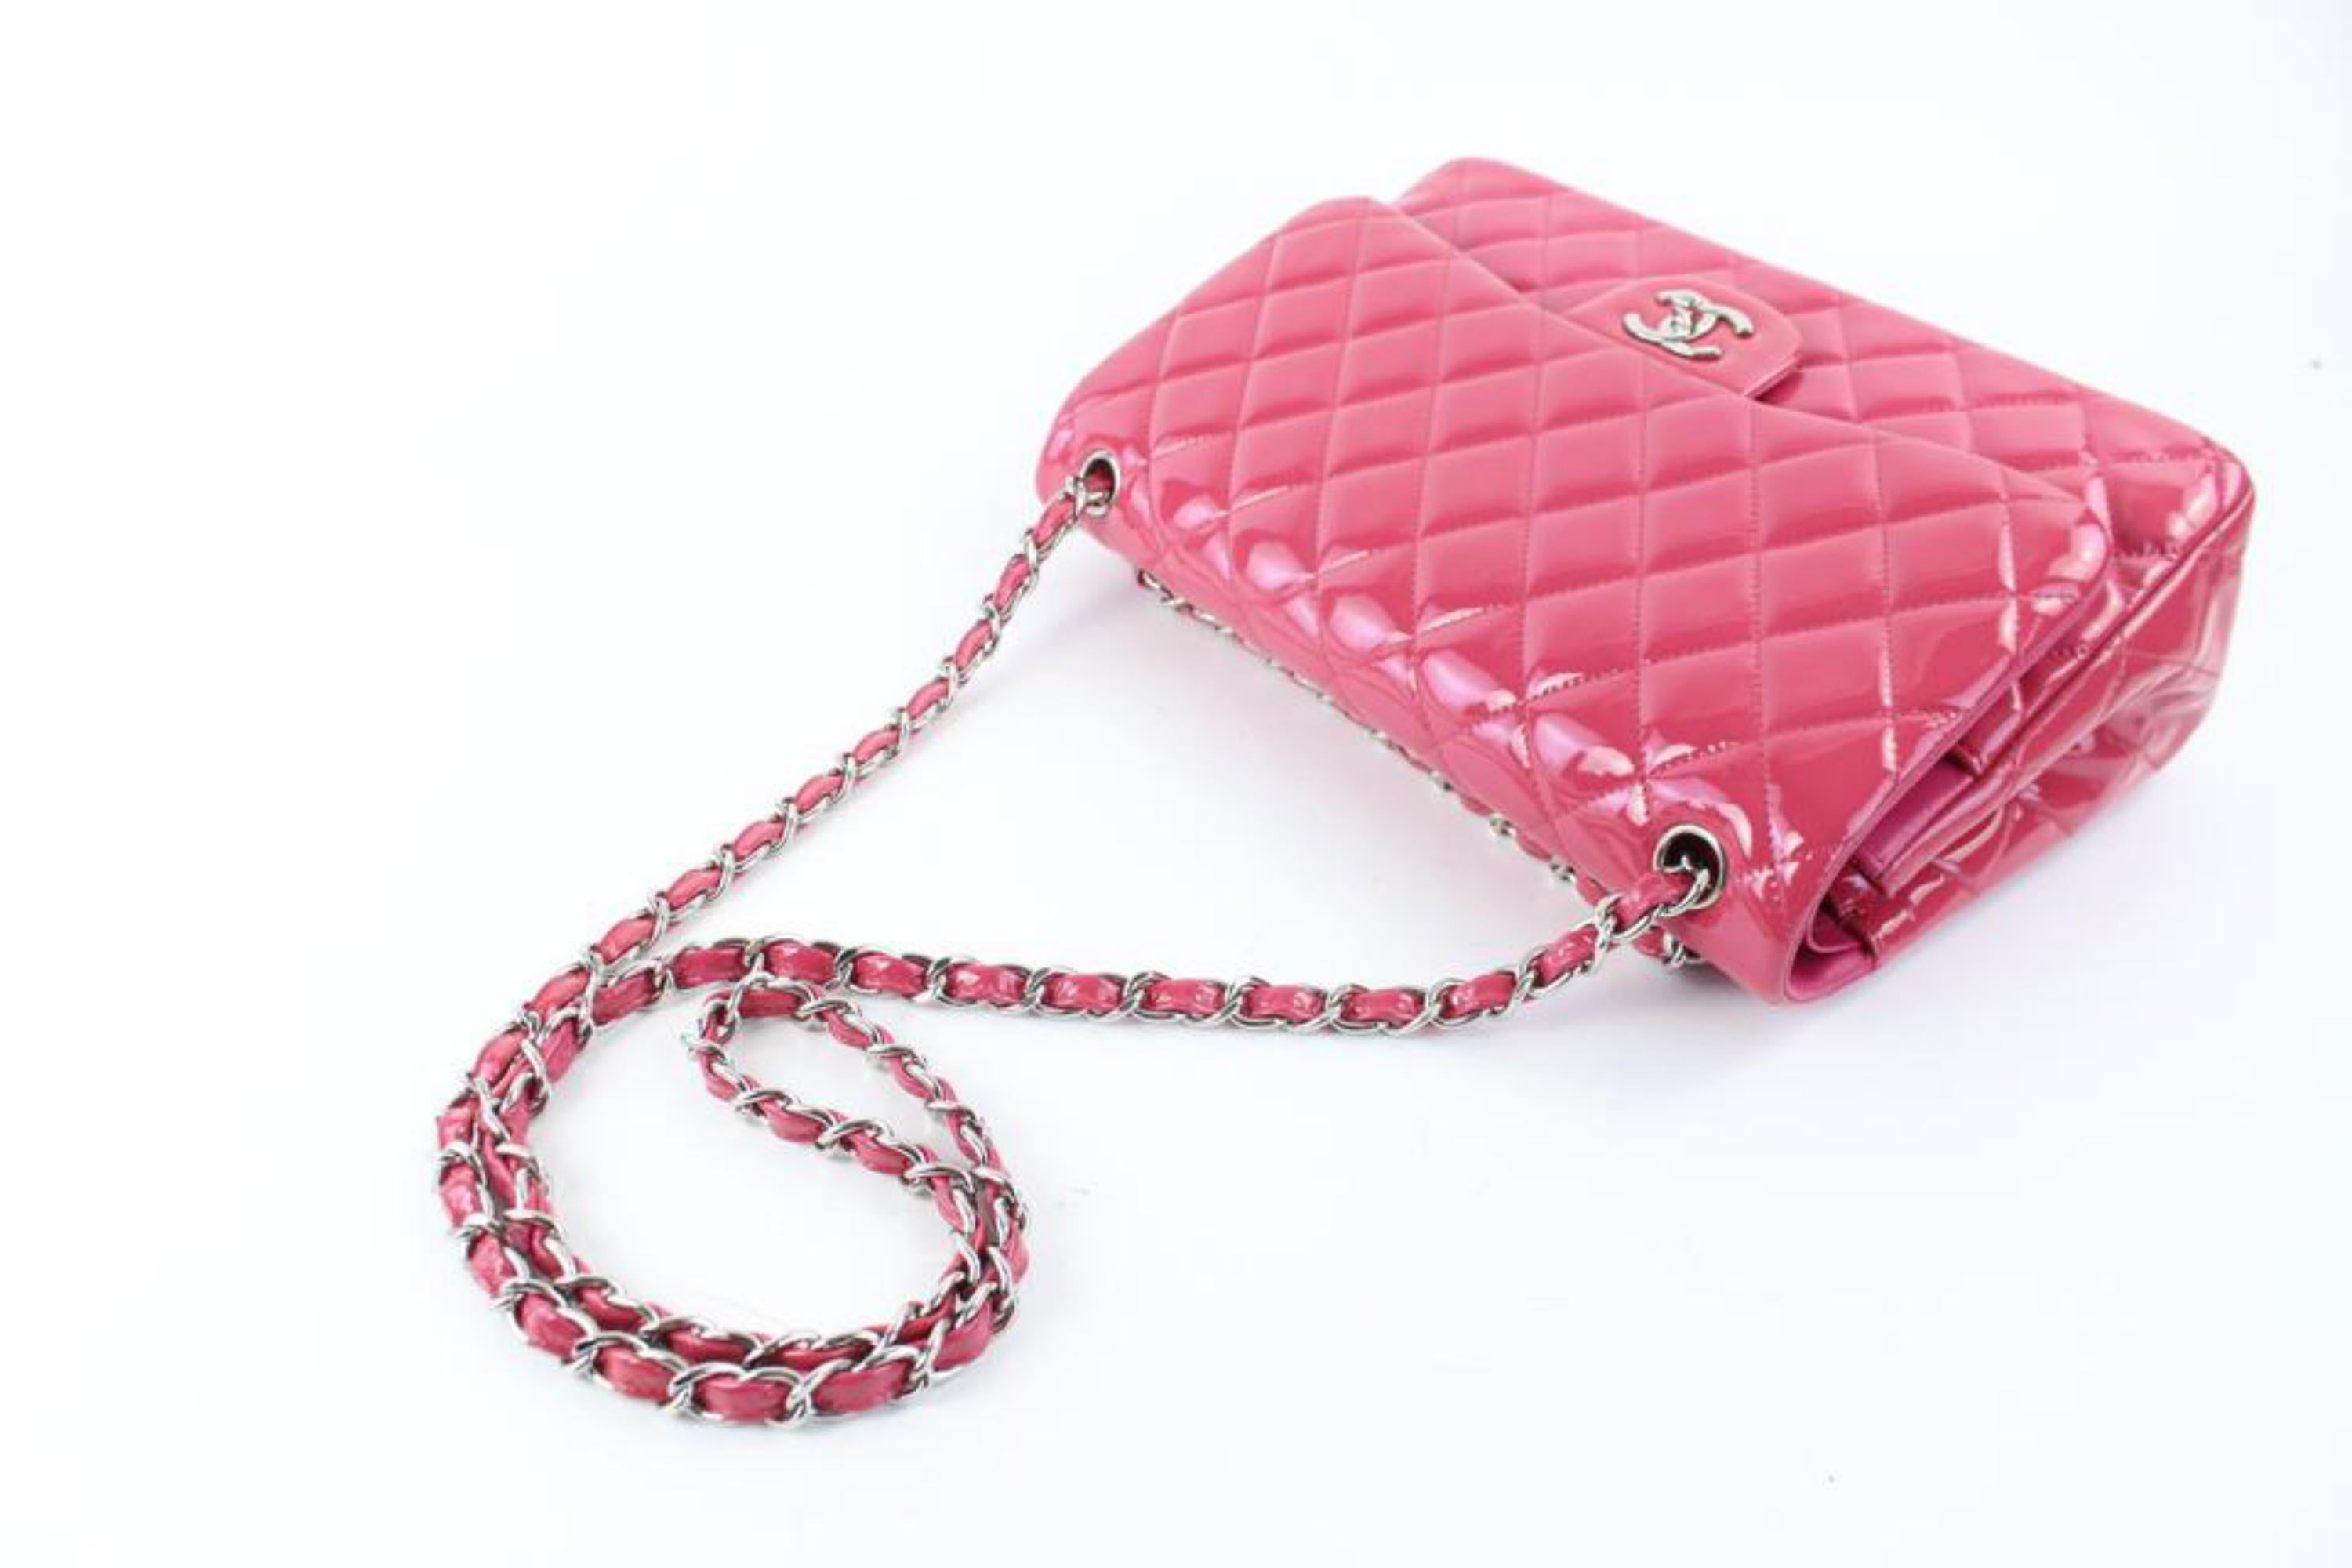 Chanel Classic Quilted Jumbo Flap 01cz0720 Dark Pink Patent Leather Shoulder Bag 2